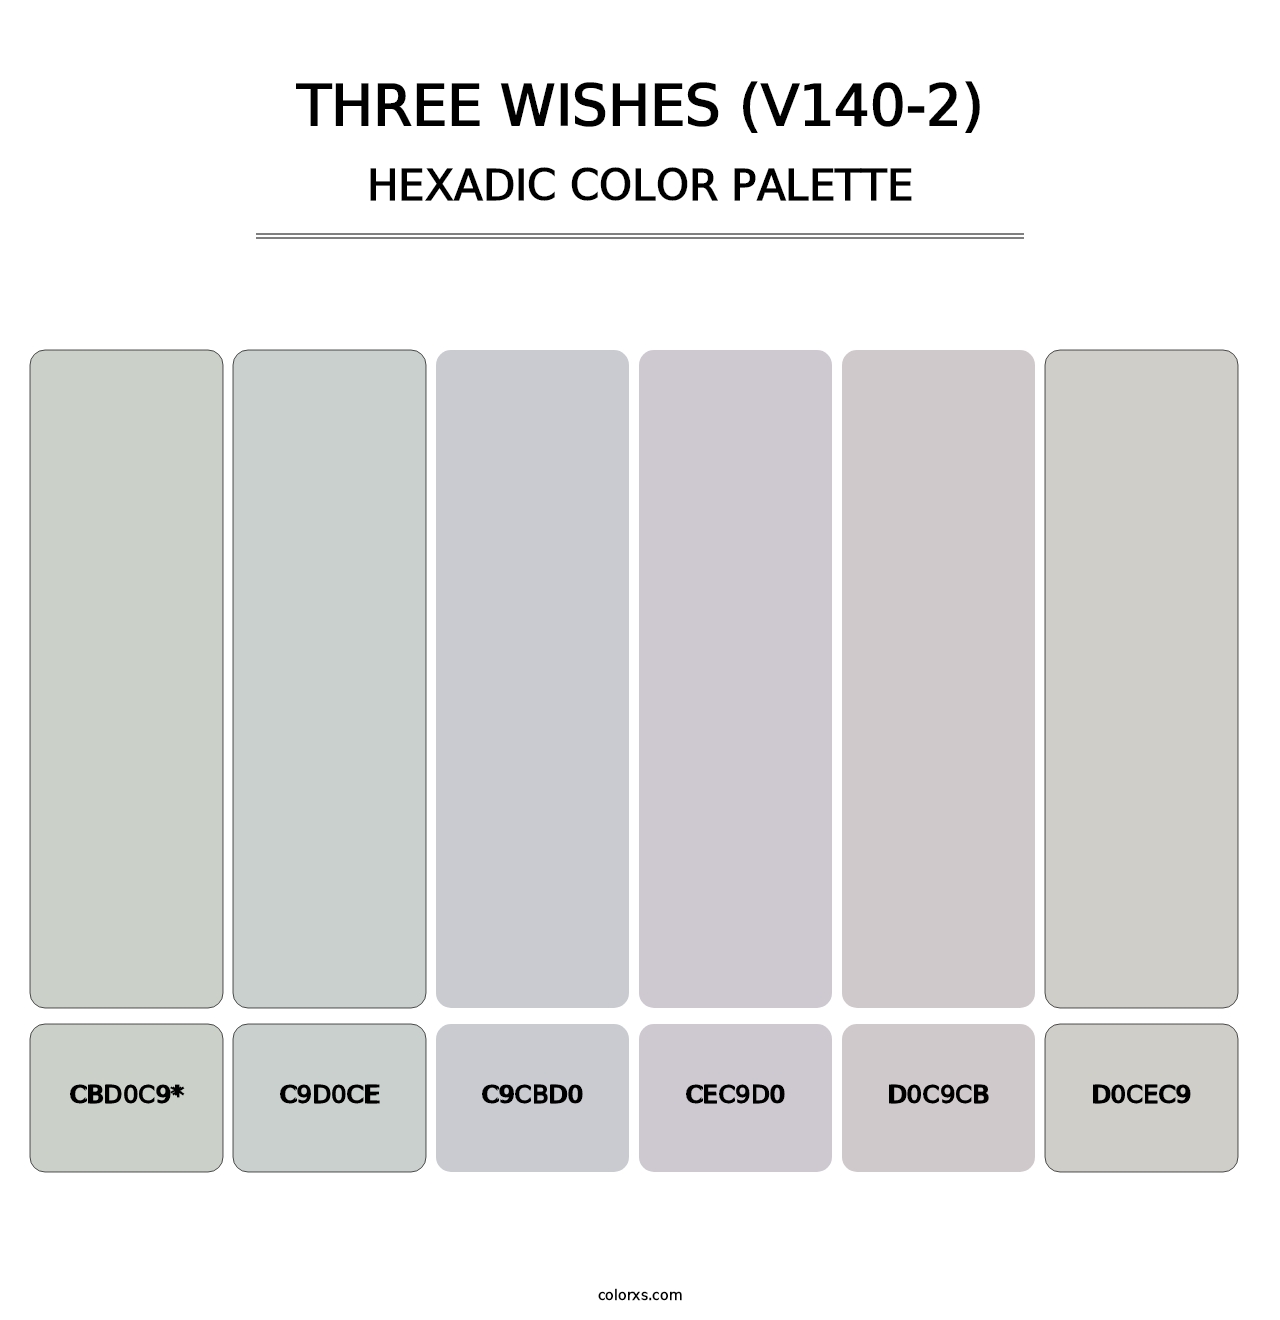 Three Wishes (V140-2) - Hexadic Color Palette